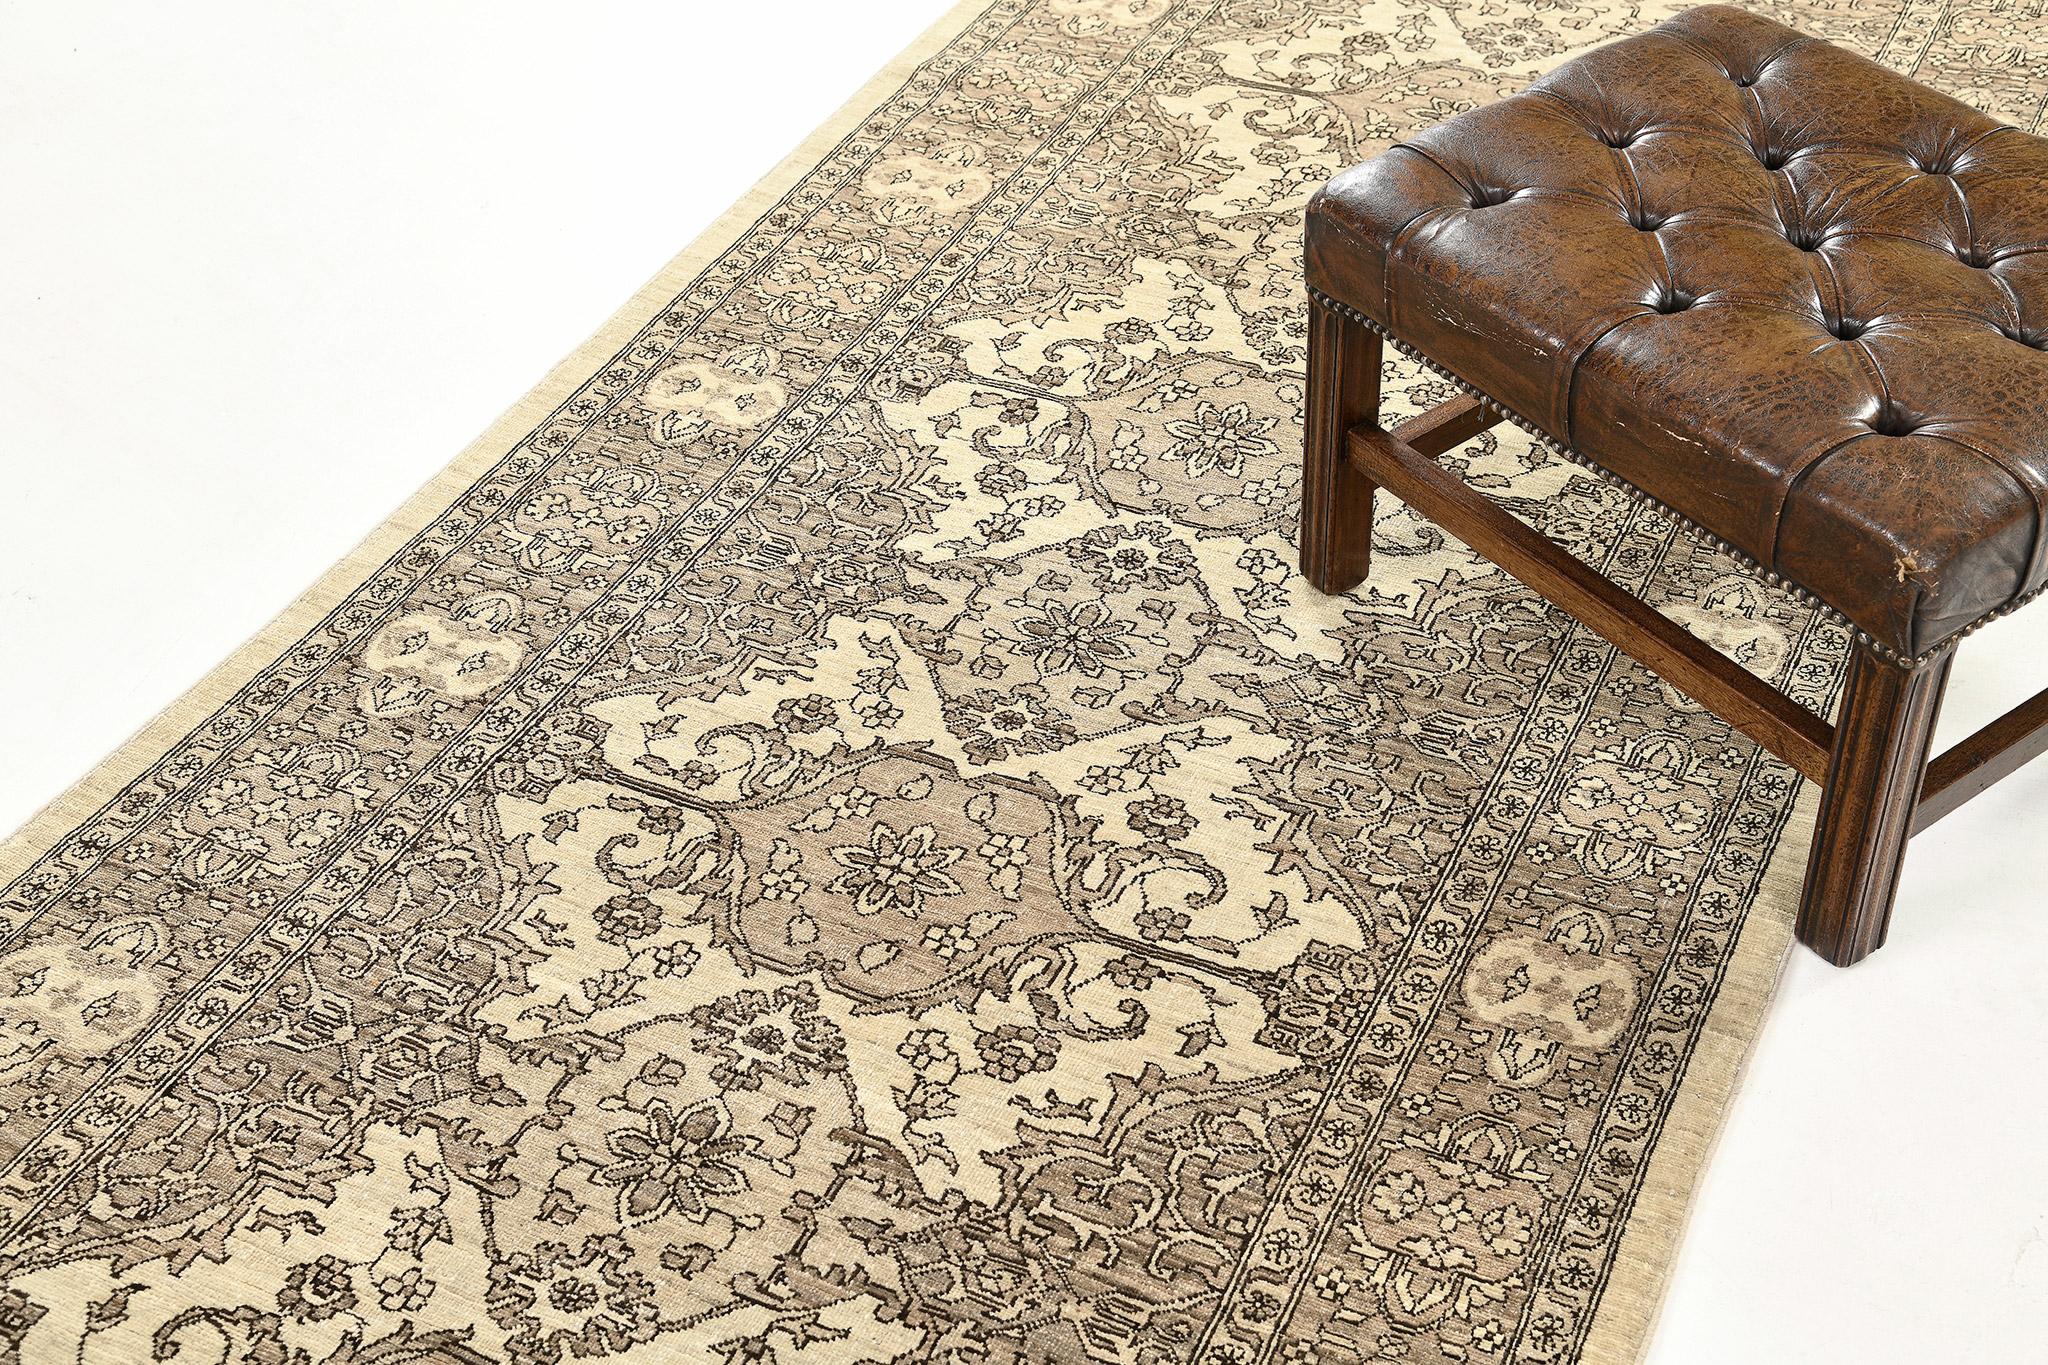 This extraordinary revival of Tabriz runner has an intricate mirrored pattern of the symmetrical elegant floral scroll and a controlled ambiance of neutral tones with symmetrical motifs of borderlines.  This masterwork of art utilizes brilliant